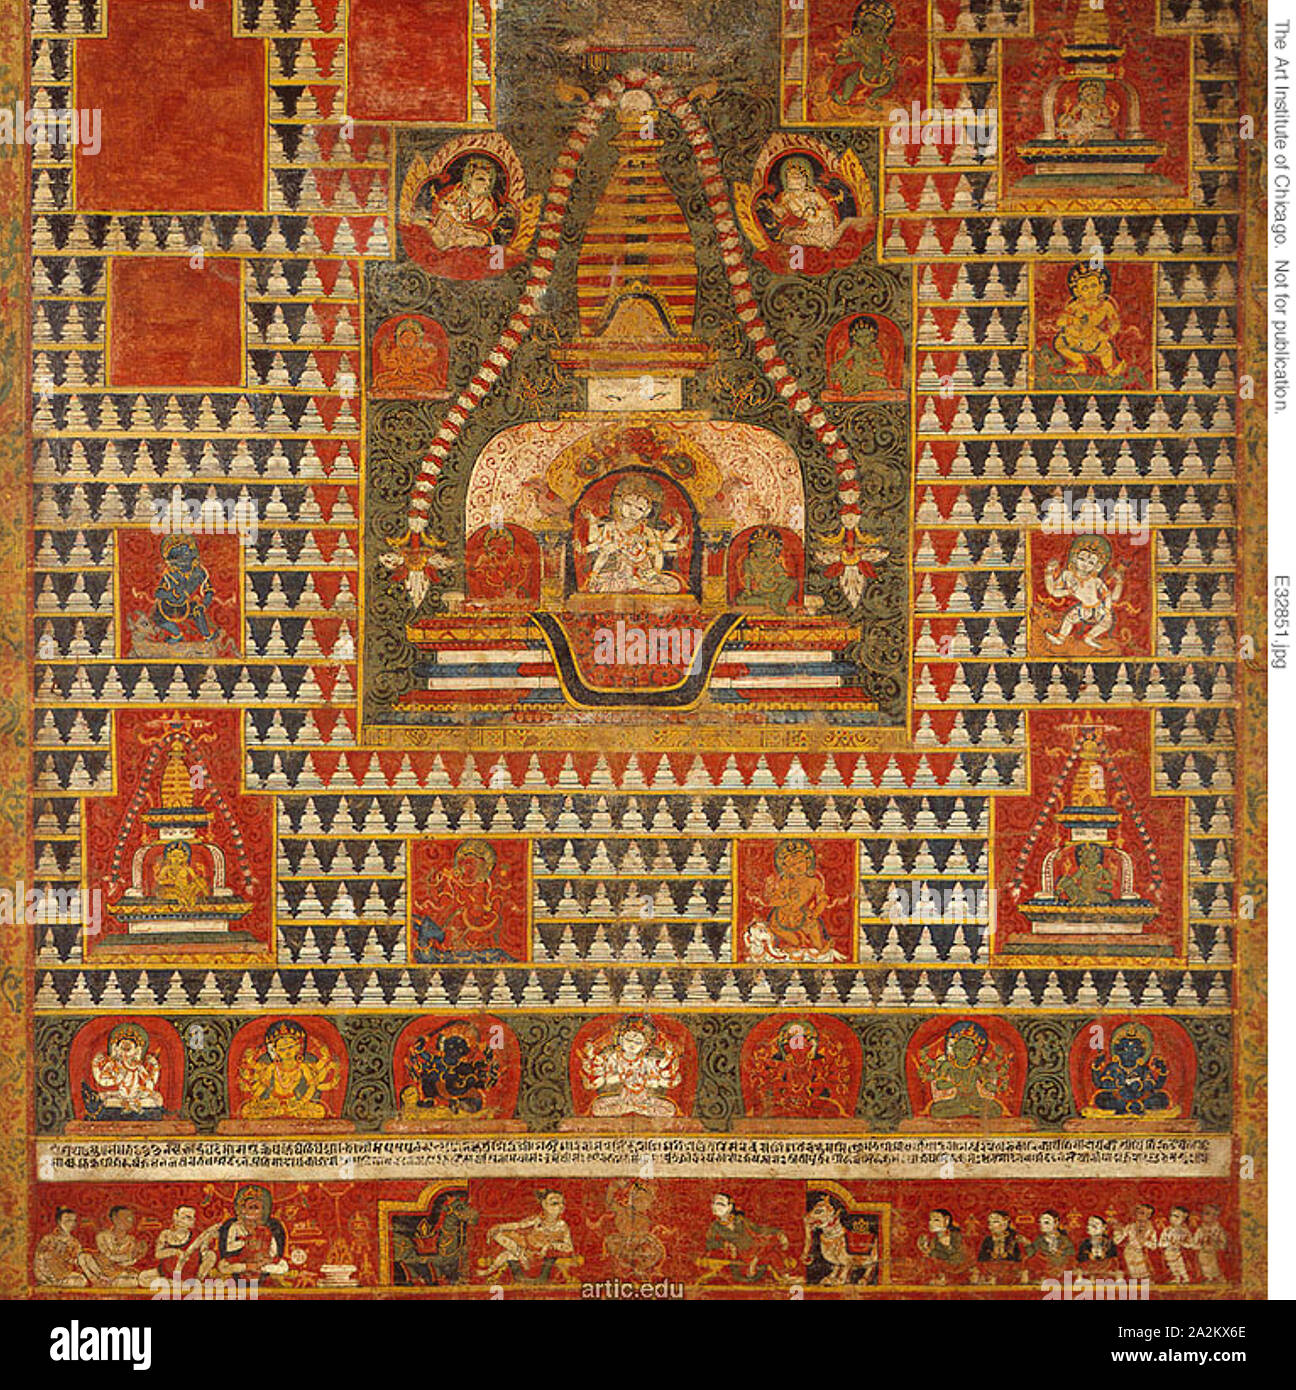 Painted Banner (paubha) of Goddess Ushnishavijaya Within a Funerary Mound (chaitya) and Surrounded by Chaityas, 1513, Nepal, Kathmandu Valley, Nepal, Opaque watercolor with gold on cotton, 58.2 × 57.2 cm (23 3/16 × 22 1/2 in Stock Photo